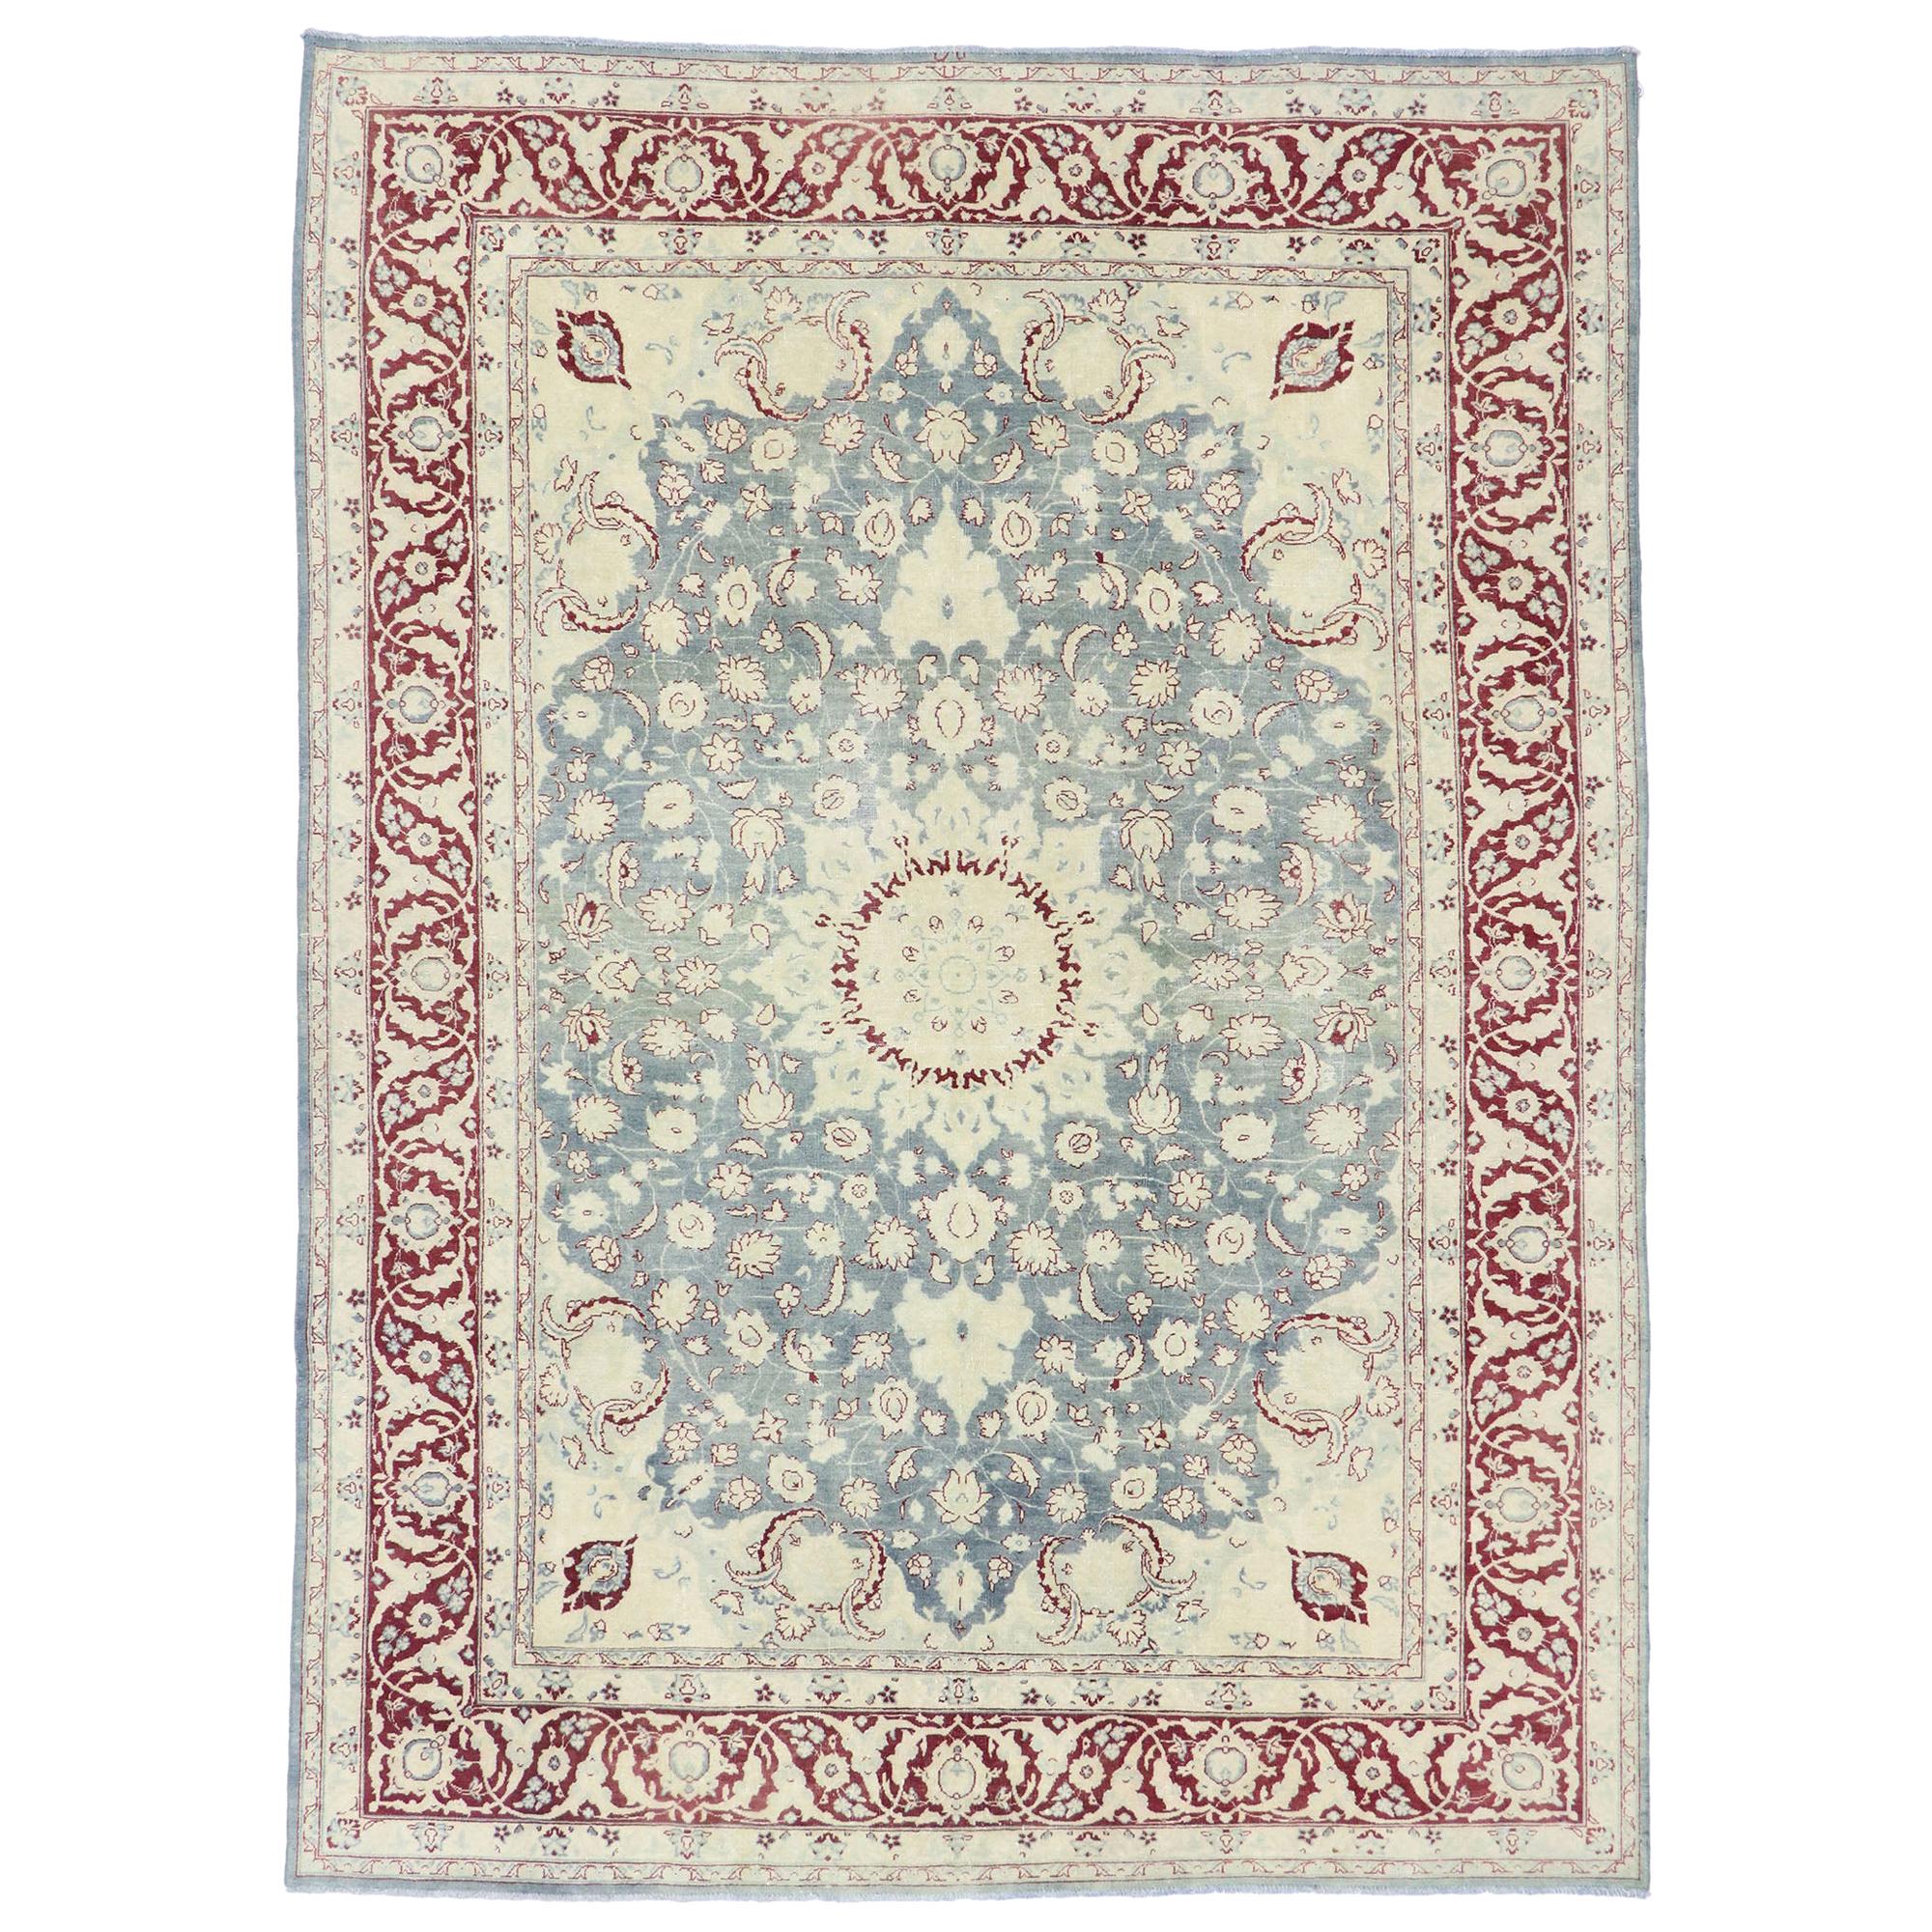 Distressed Antique Persian Tabriz Rug with Modern Rustic English Style For Sale